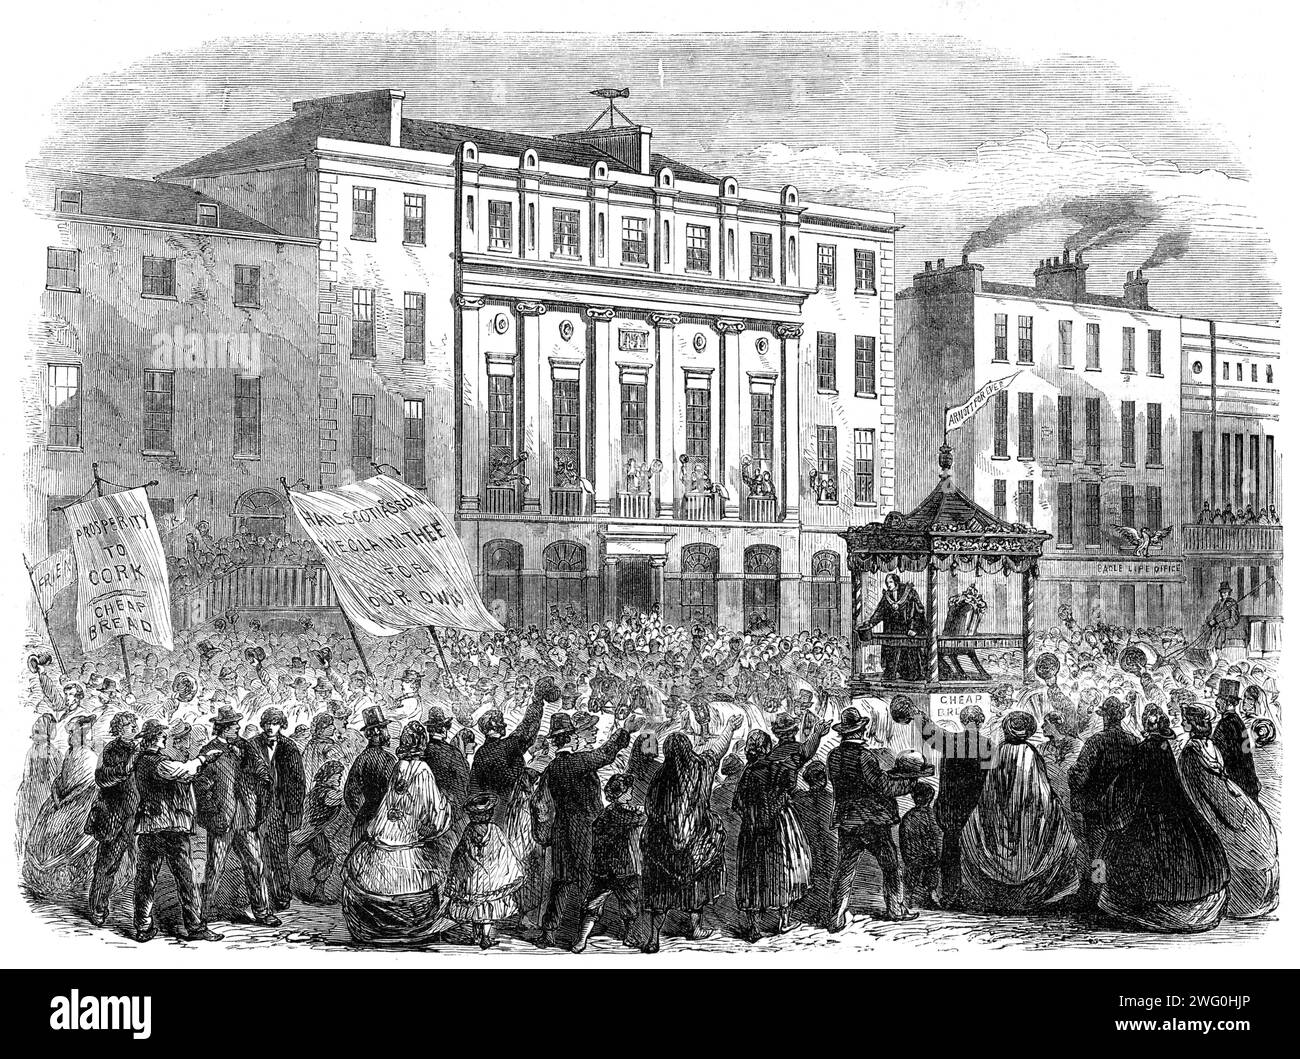 The Chairing of Sir John Arnott at Cork on the completion of his three years' mayoralty: the procession passing the Commercial Buildings, 1862. 'After the inauguration, on the 1st January, of Mr. Maguire, M.P., who has been elected Mayor of Cork for the present year, the city trades, to show their respect to Sir John Arnott, whose extensive charities have rendered him a general favourite, chaired him through the city, preceded by bands of music and the various symbols of their guilds'. Arnott was elected Lord Mayor of Cork three times, in 1859, 1860 and 1861. He was also Sheriff of Cork City i Stock Photo